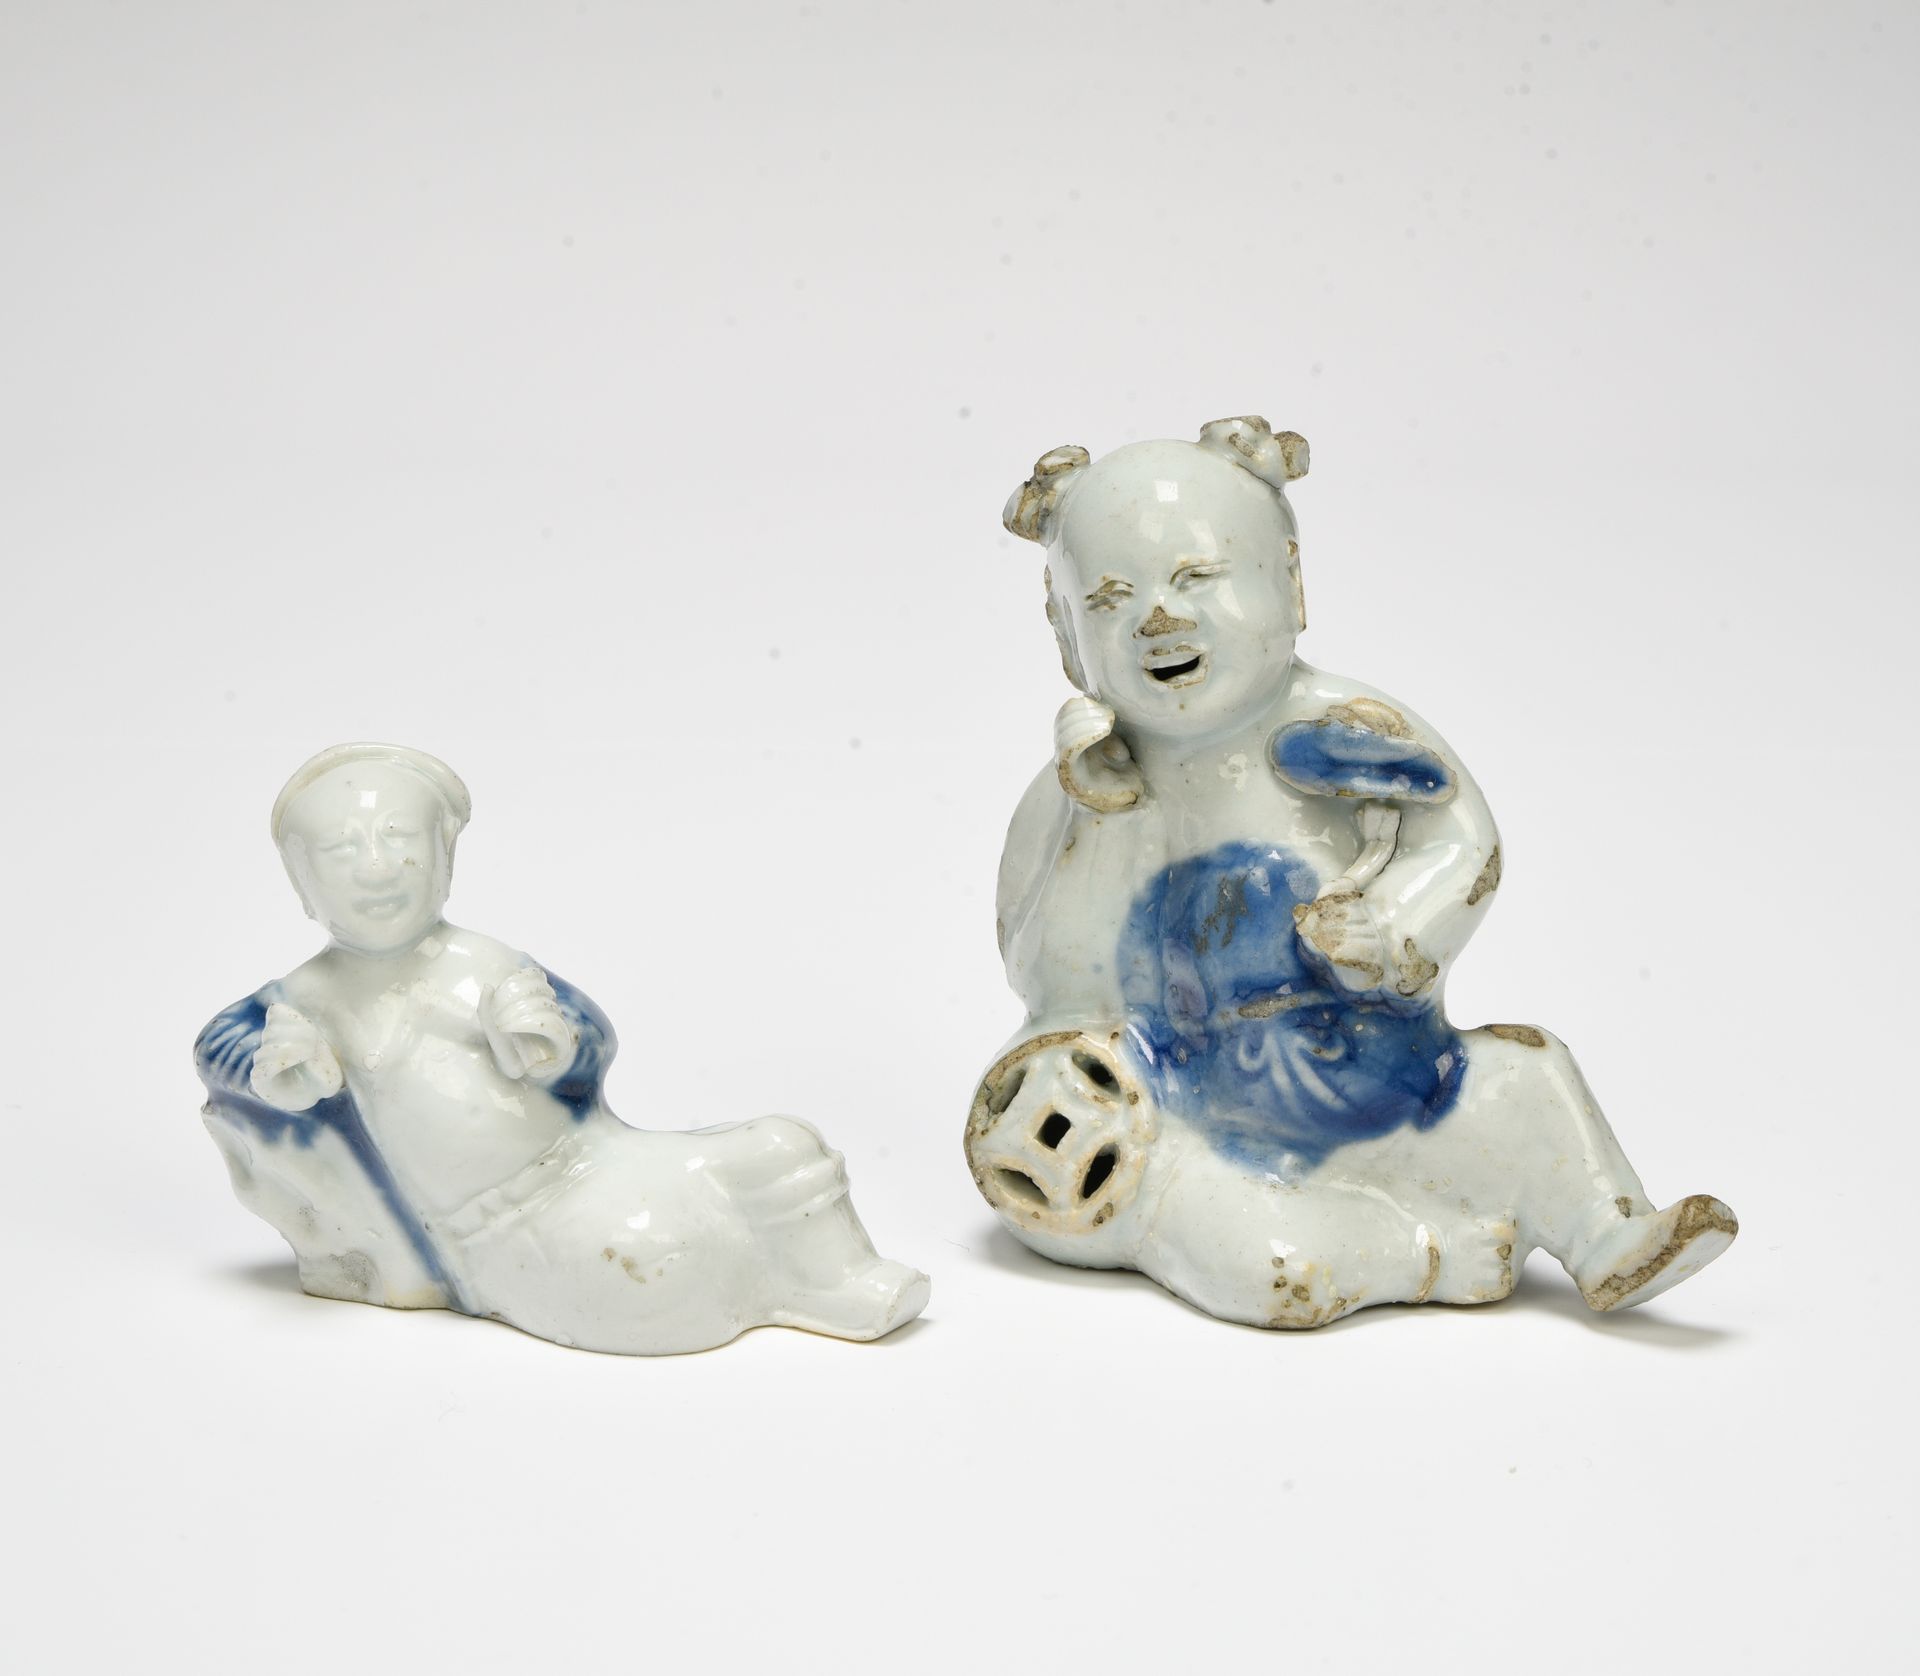 Null Two statuettes

CHINA - 18TH CENTURY

Porcelain, one depicting a boy sittin&hellip;